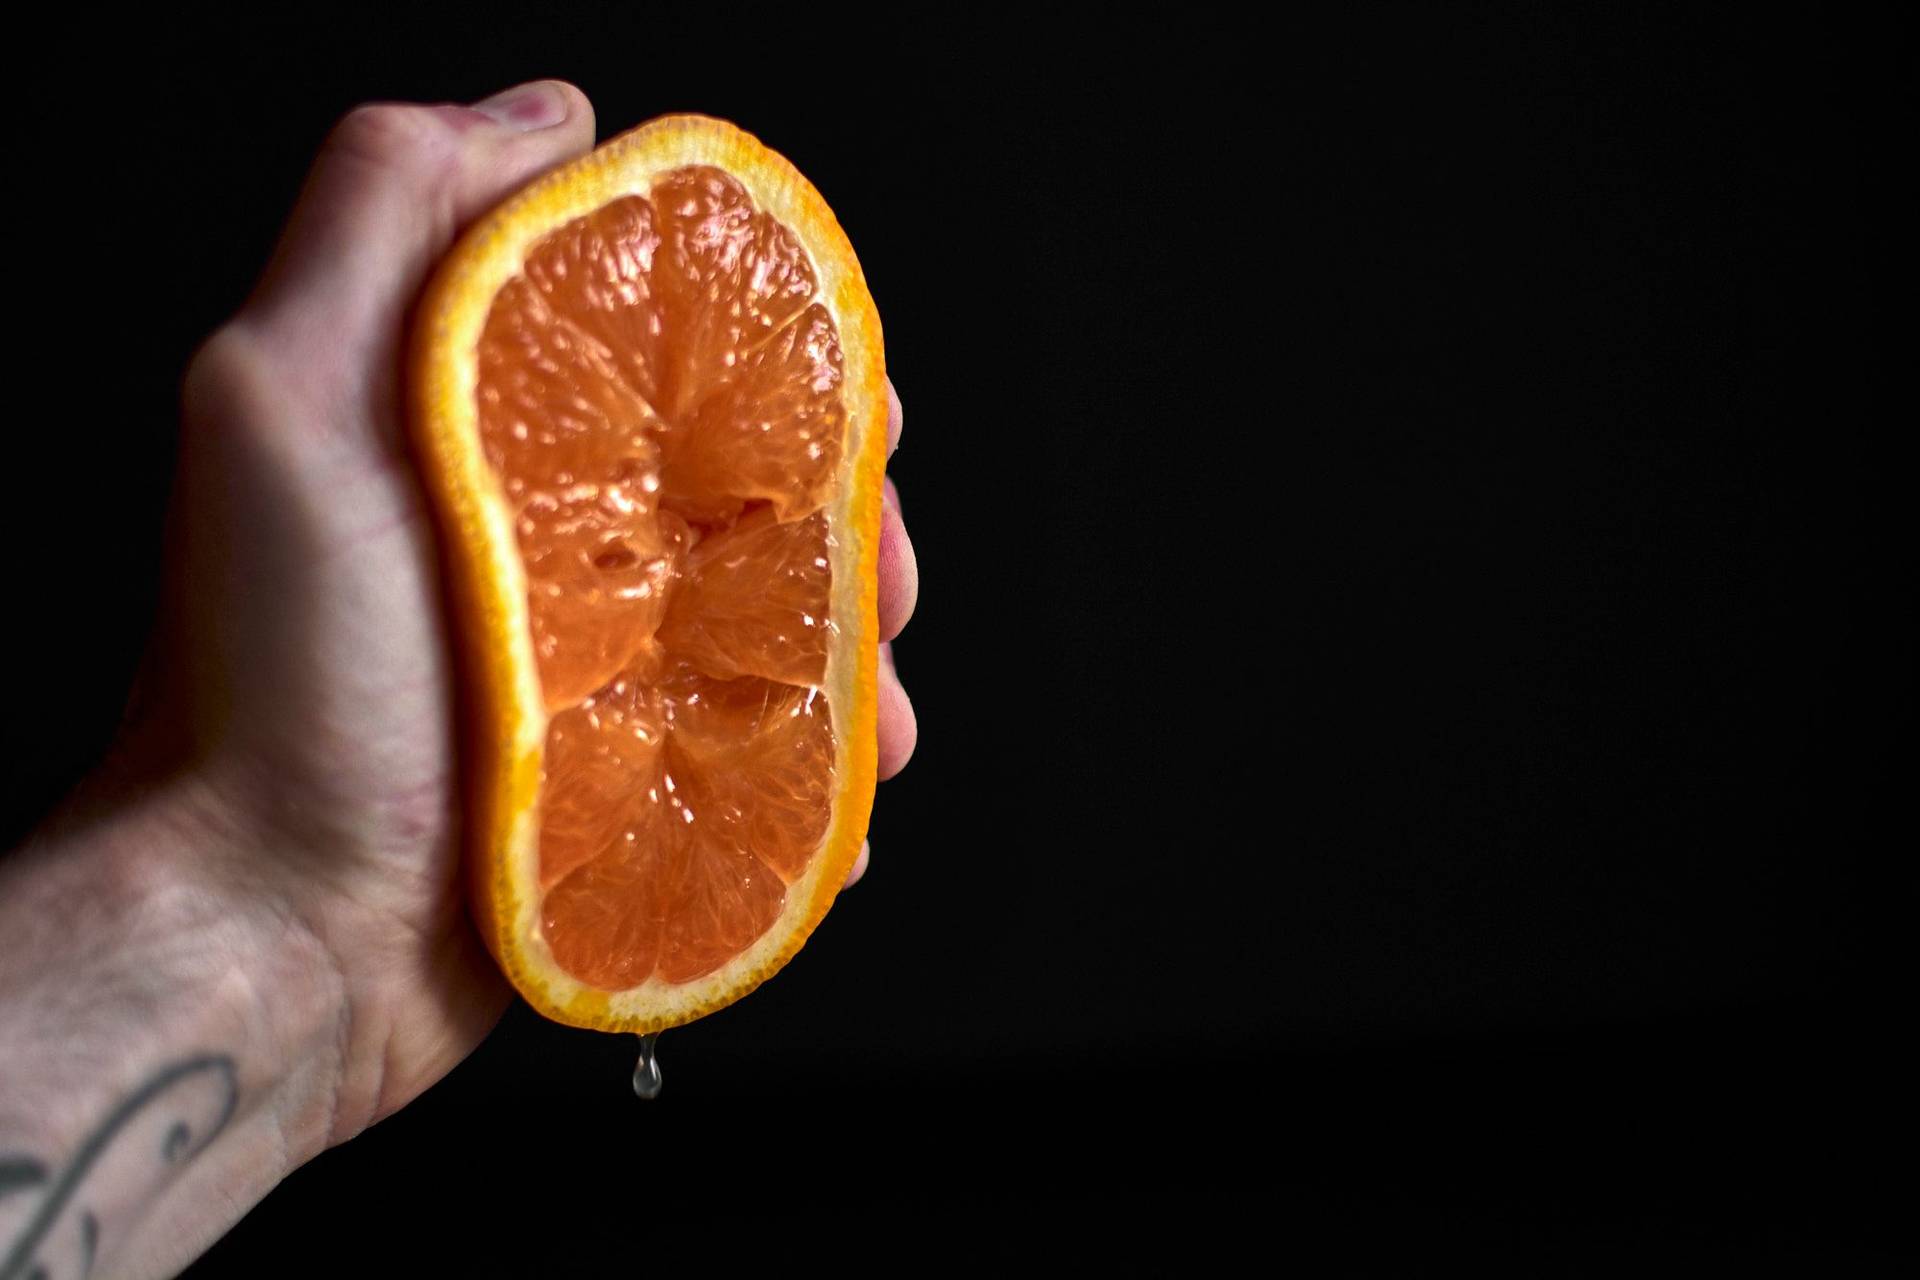 hand squeezing an orange on black background